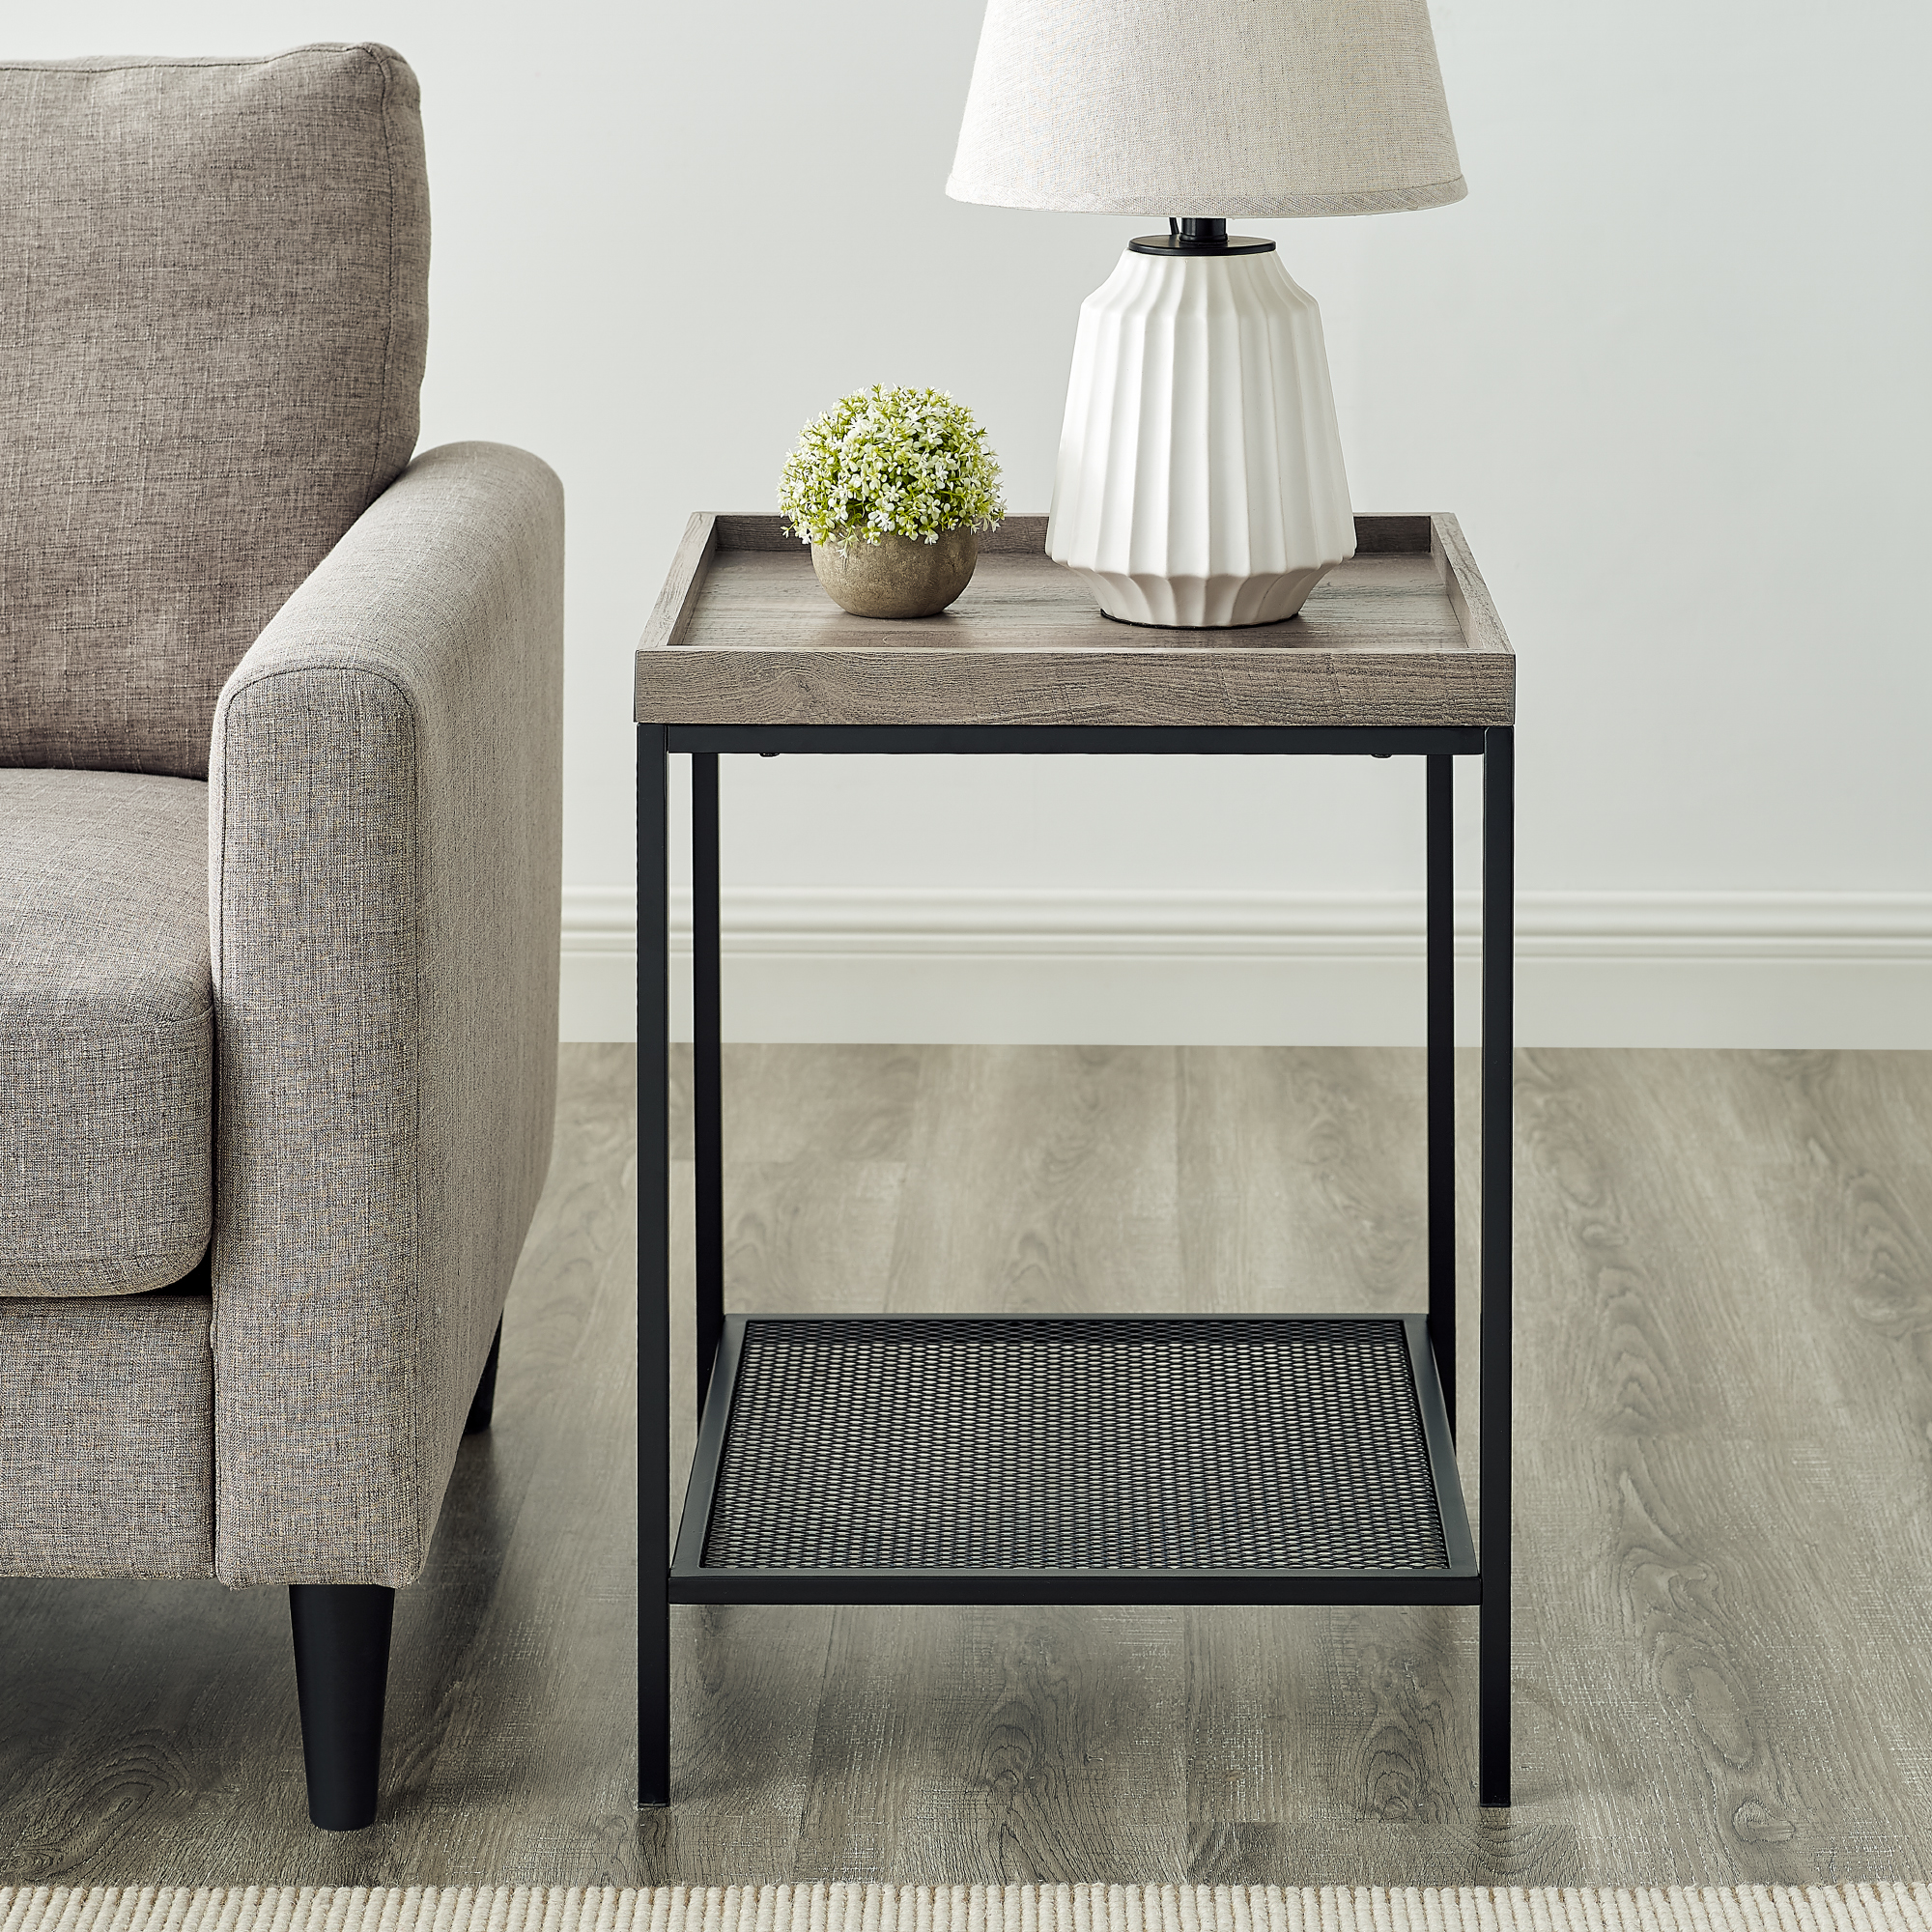 River Street Designs Frankie Metal and Wood Tray Top Grey Wash End Table - image 2 of 9